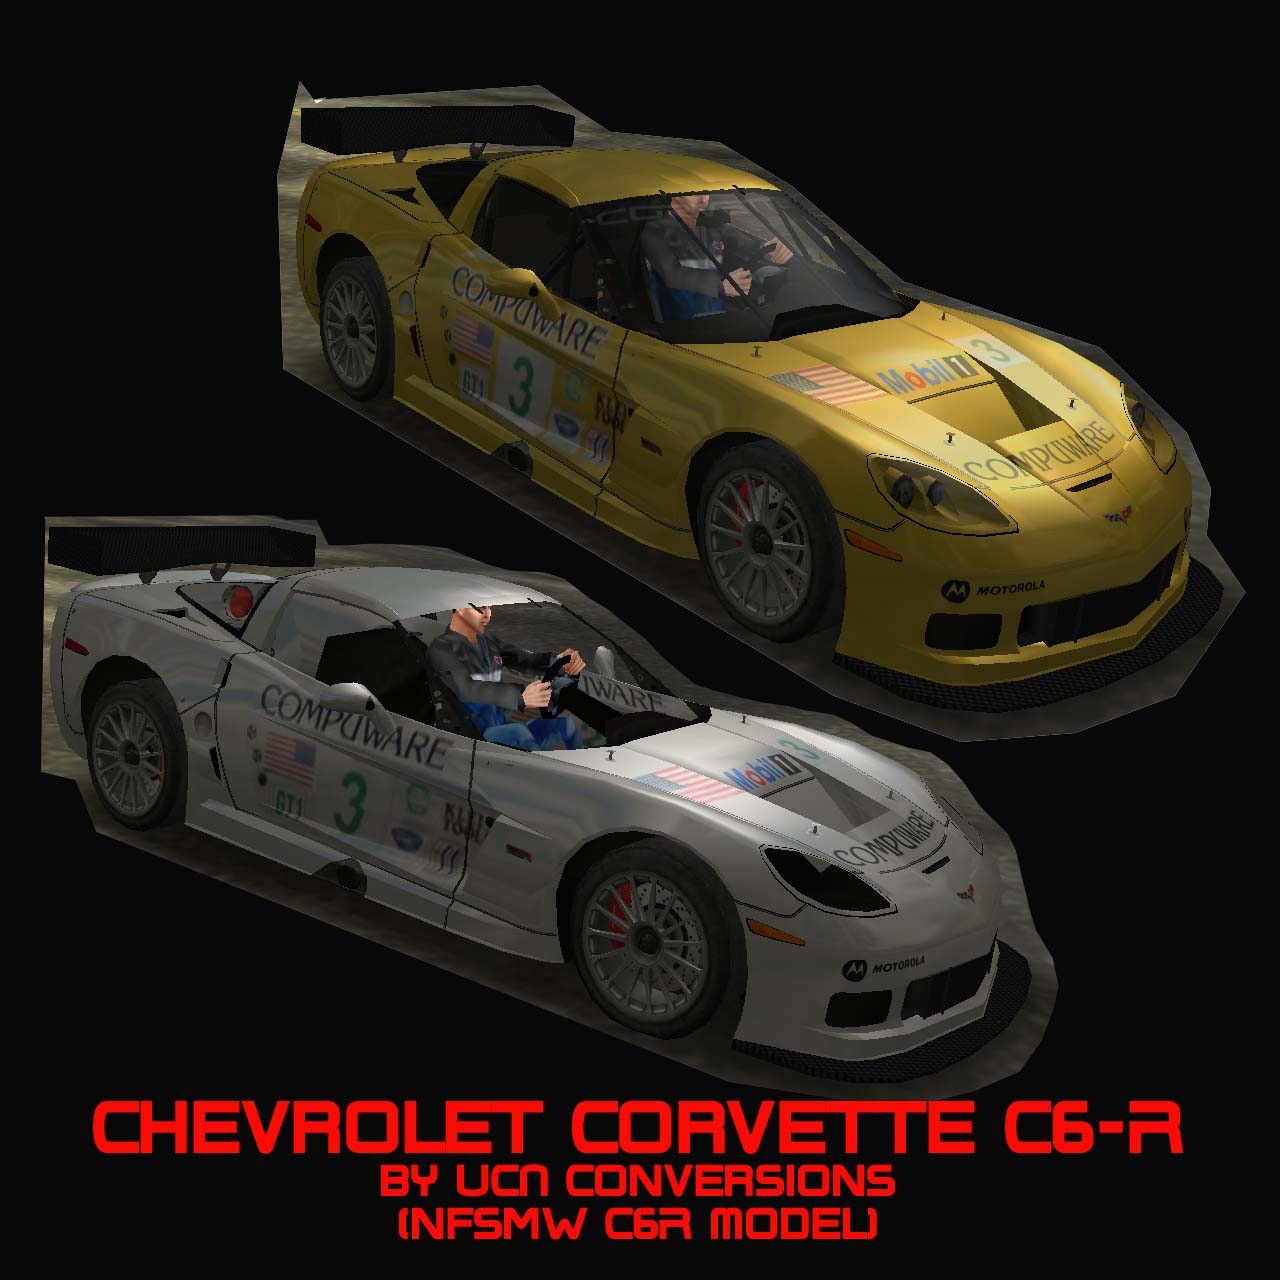 Chevrolet C6-R (with Decals)